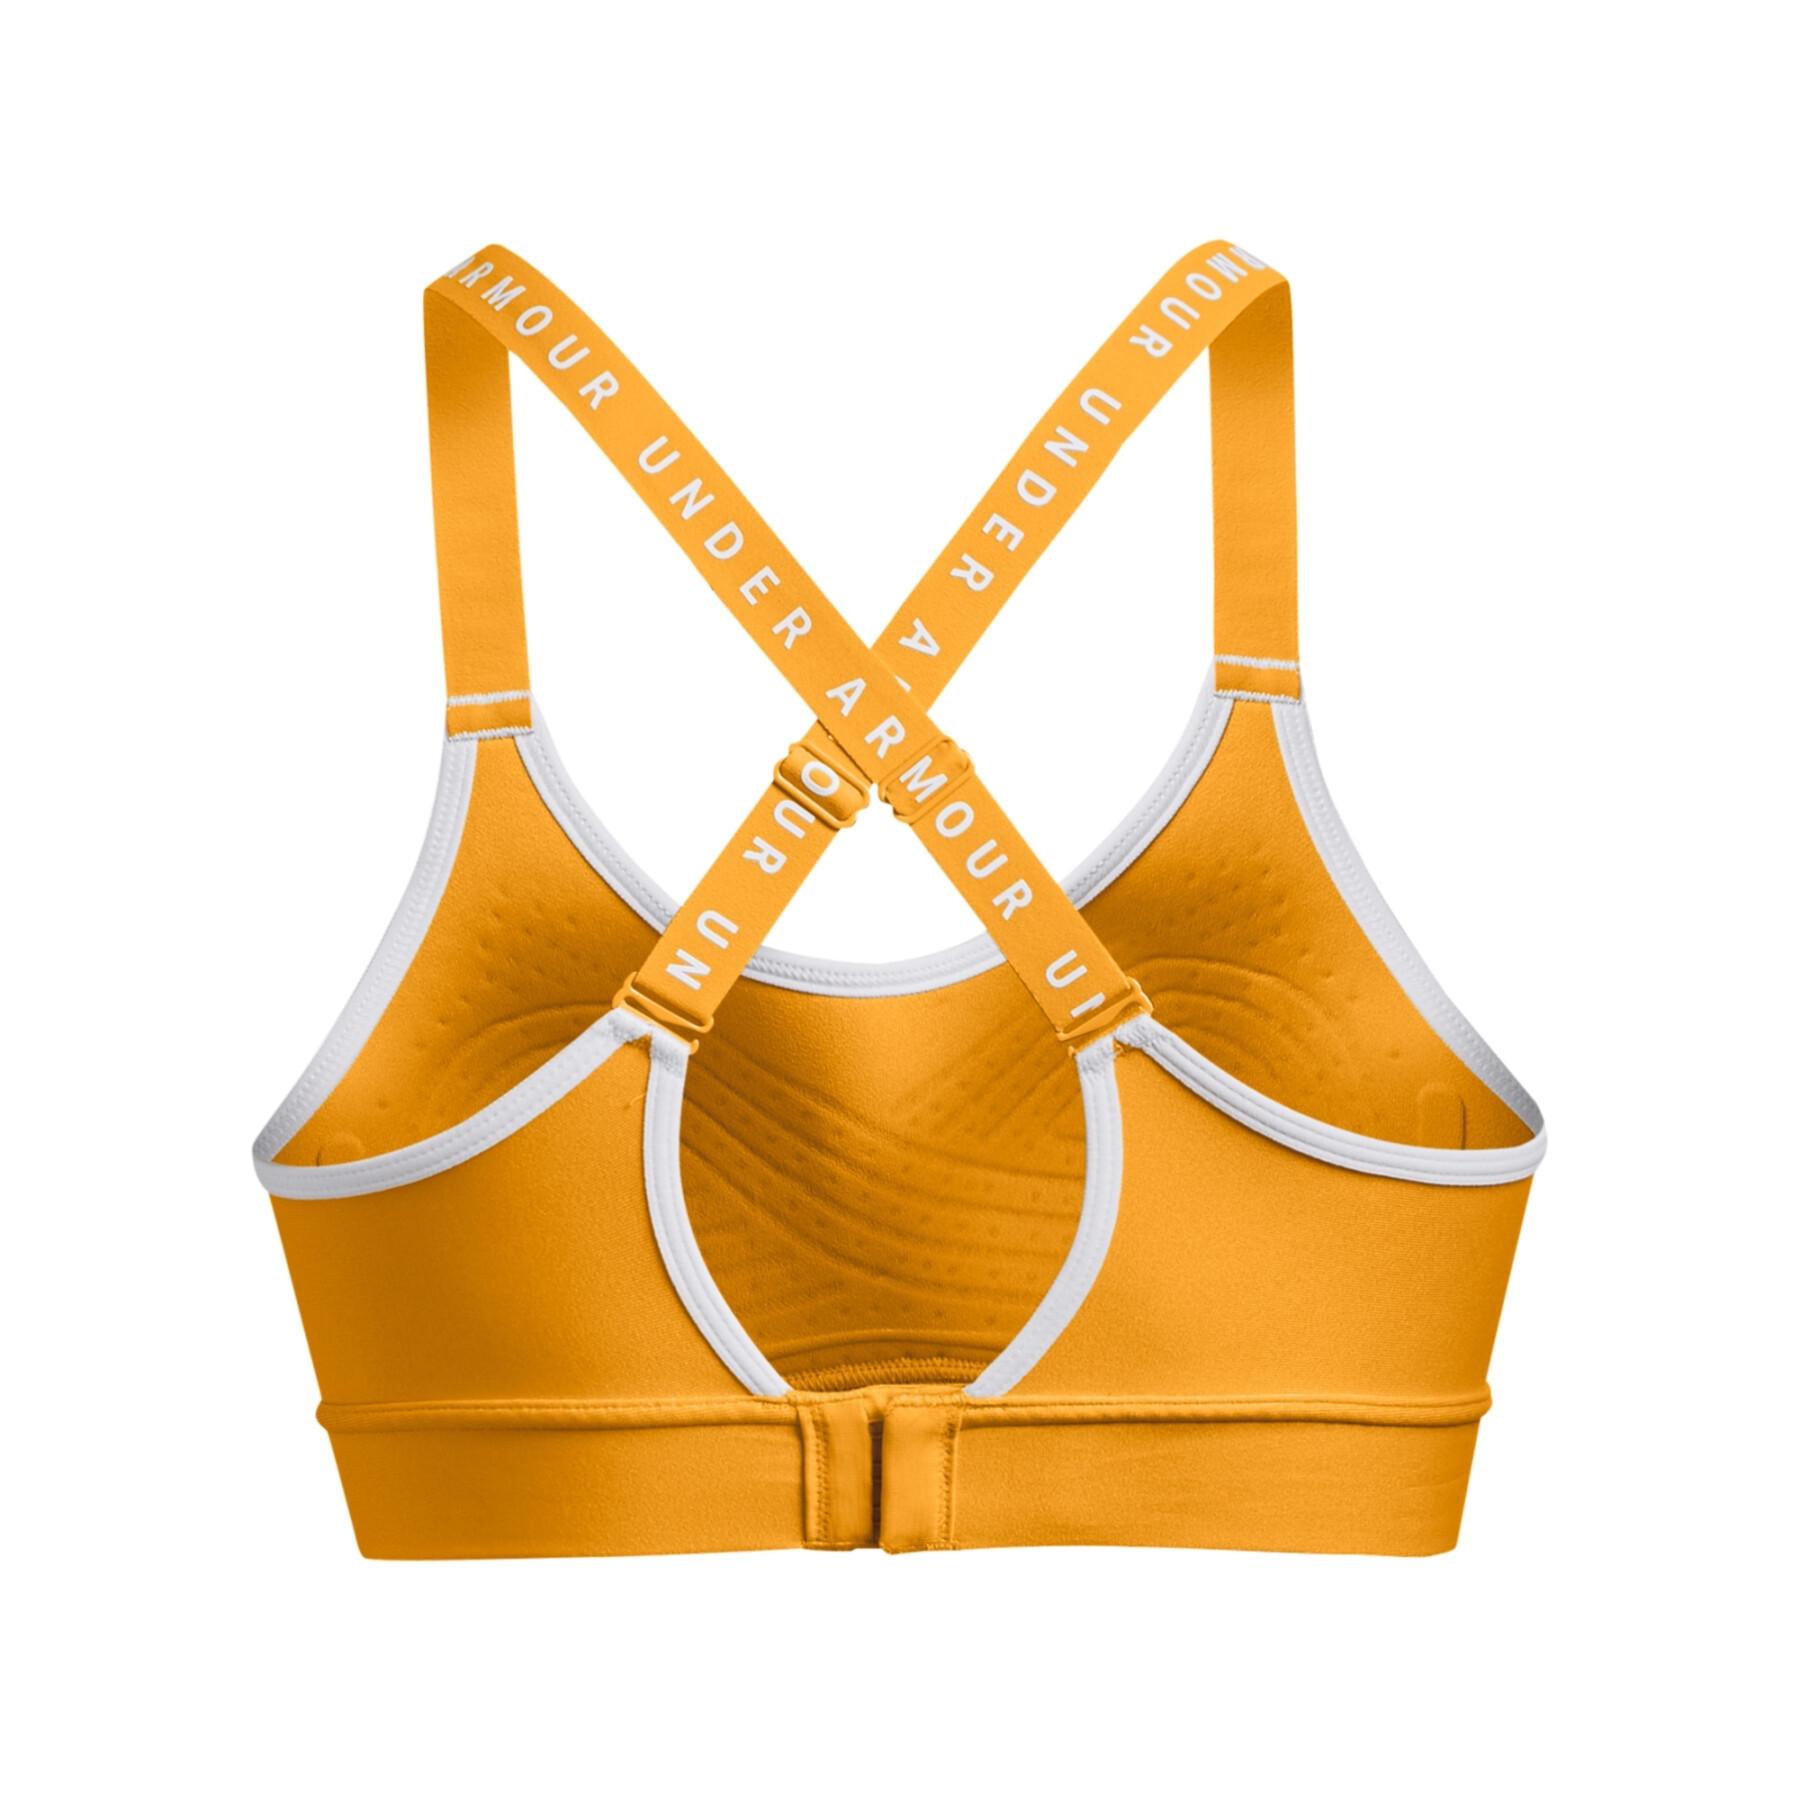 Women's bra Under Armour Infinity Mid - Covered Impact